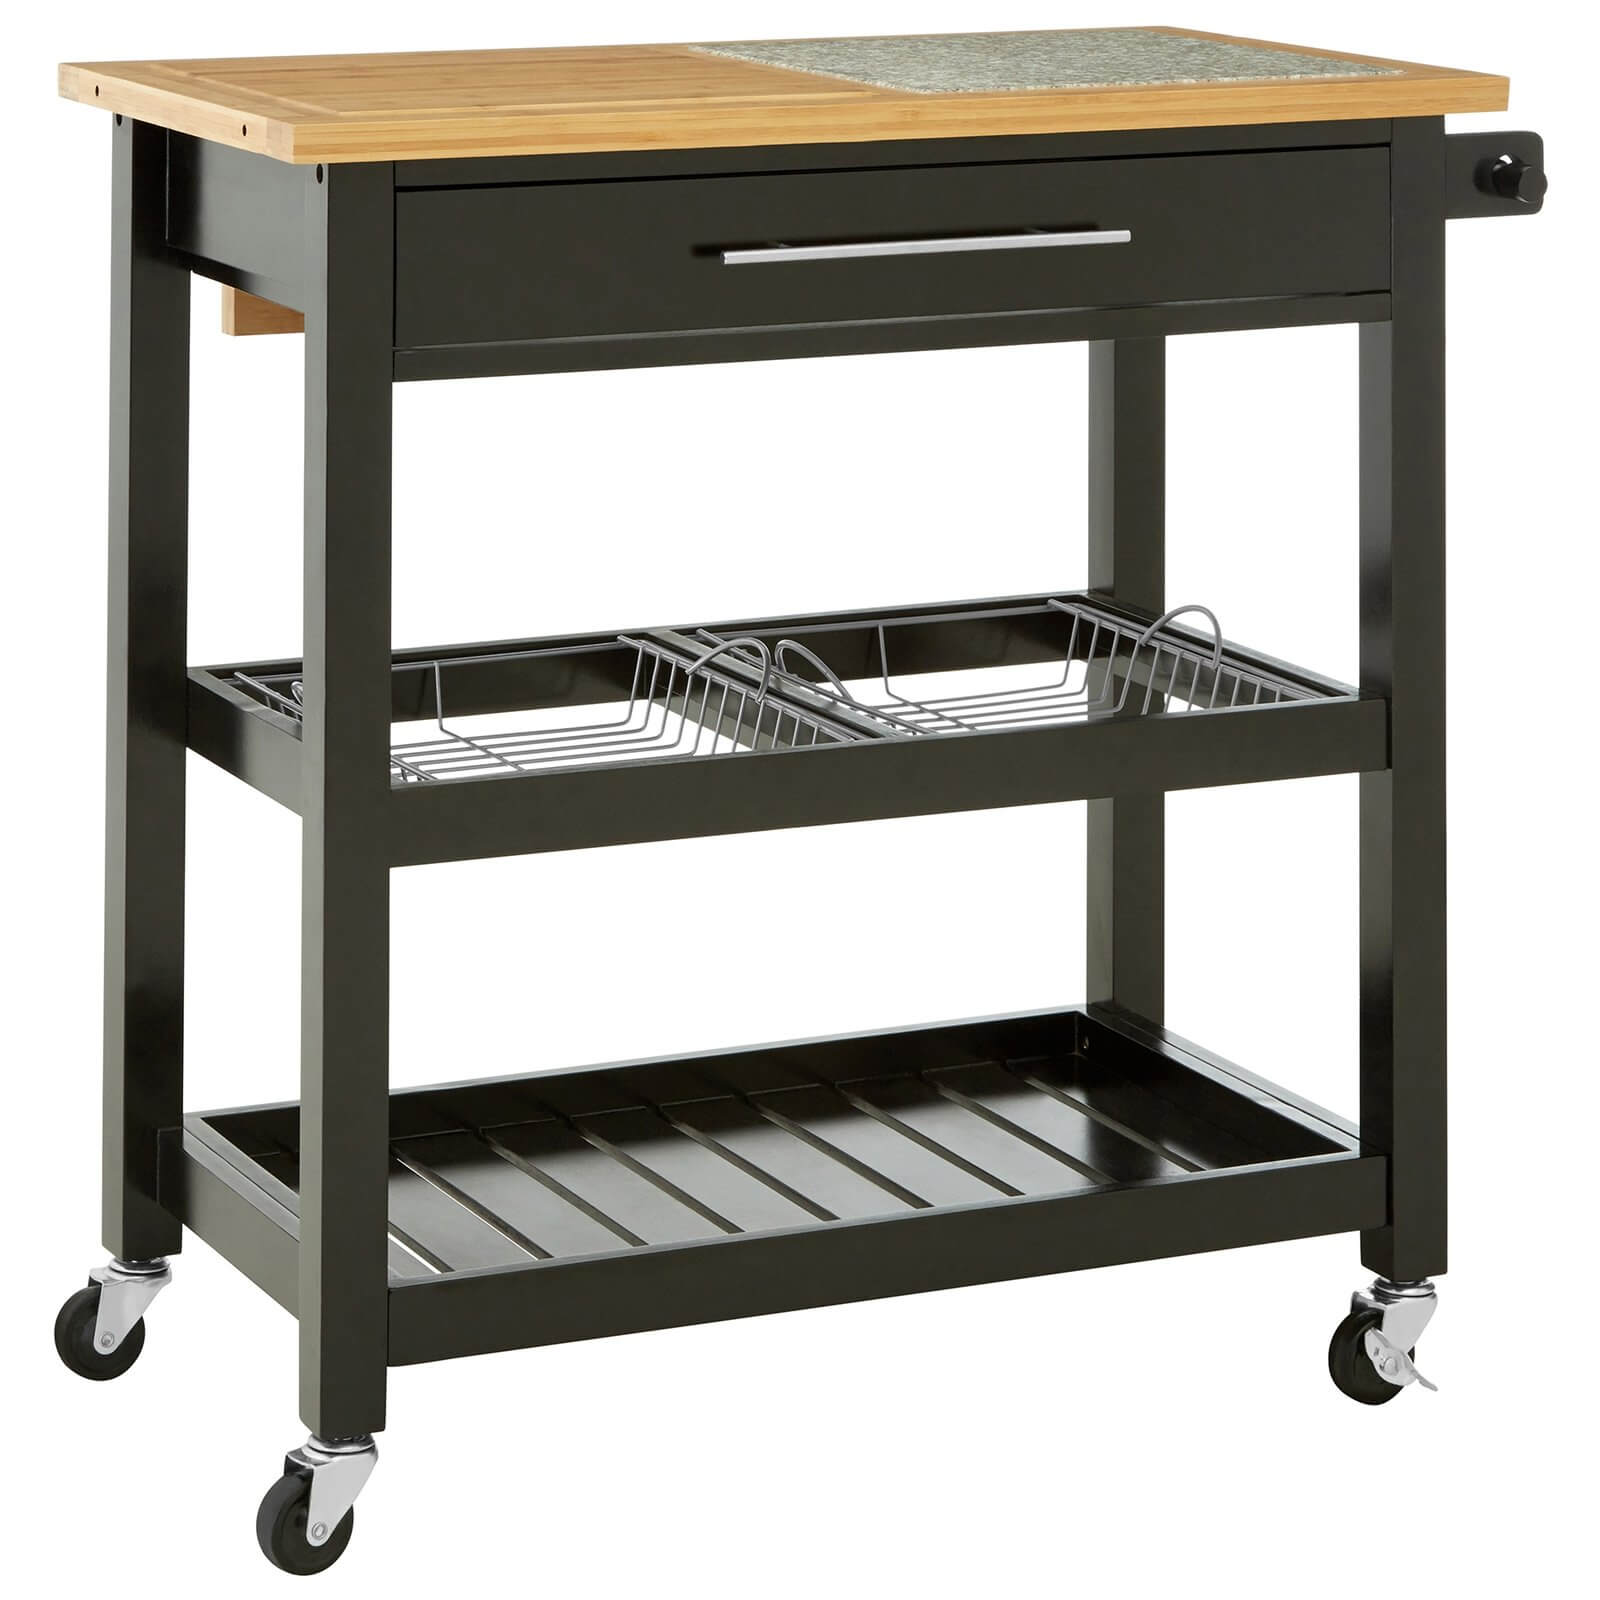 Wide Kitchen Trolley with Granite Top